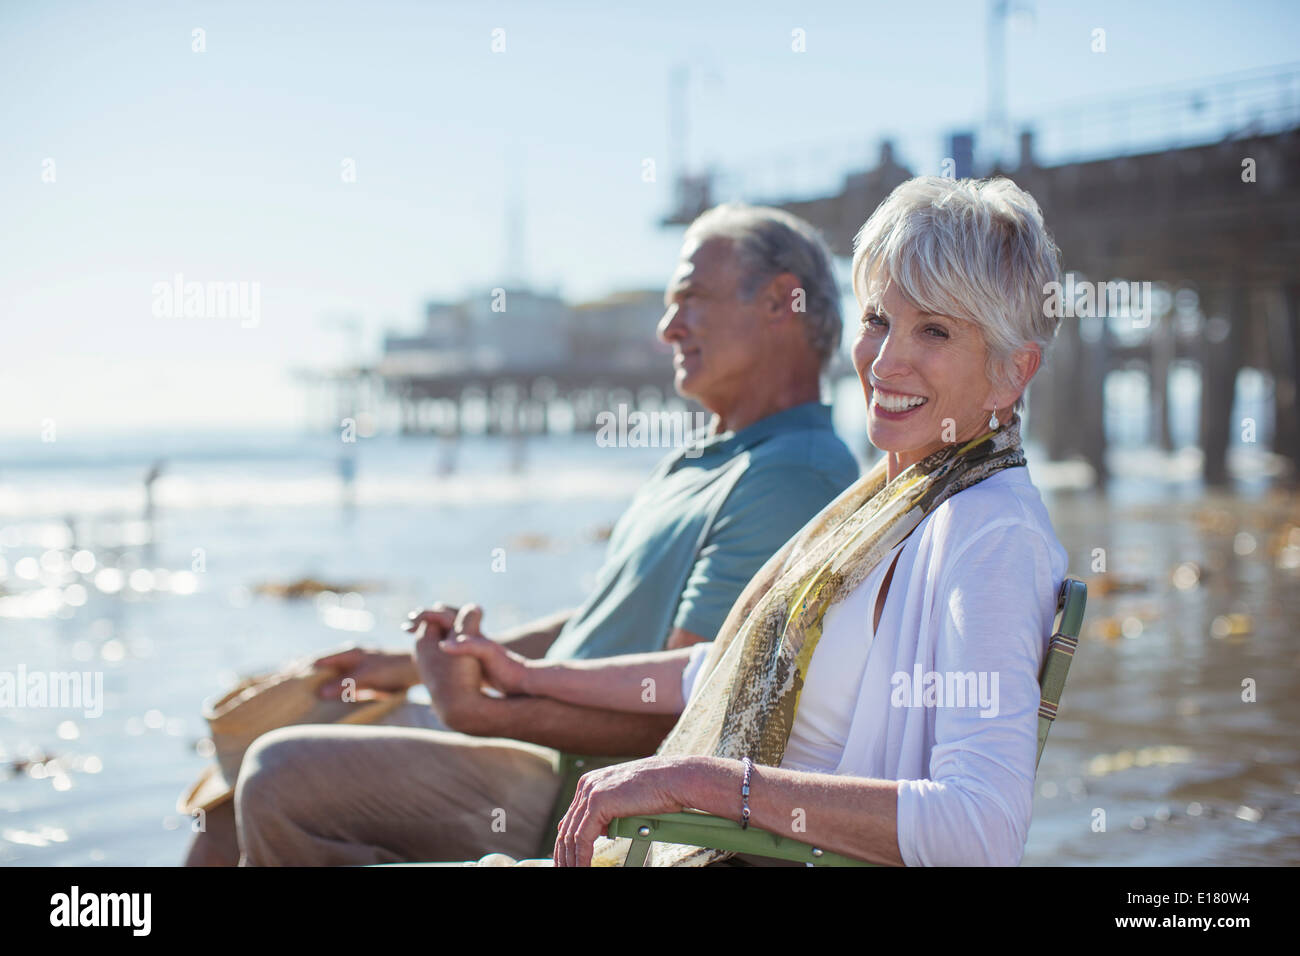 Portrait of senior couple relaxing in lawn chairs on beach Stock Photo